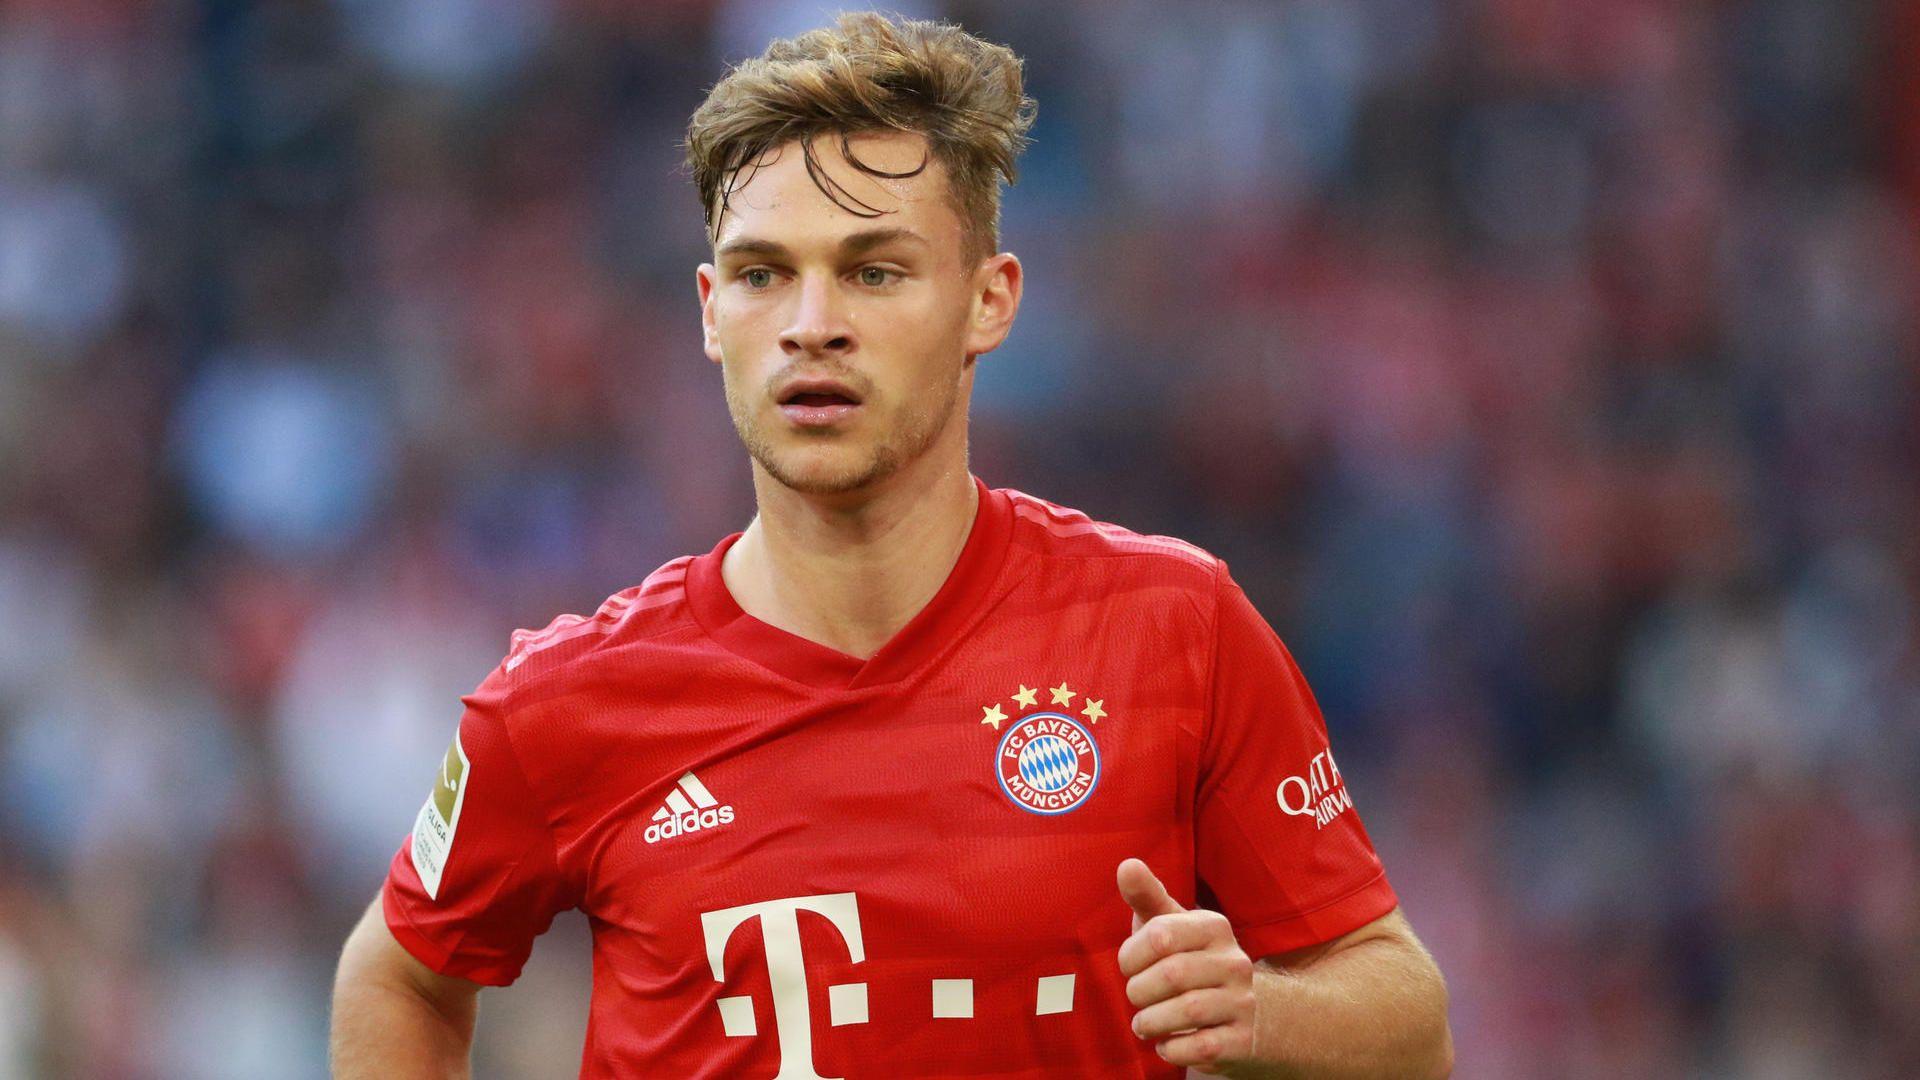 Kimmich Wallpaper Joshua Kimmich Iphone 2020 Wallpapers Wallpaper Cave People Interested In Joshua Kimmich Wallpaper Also Searched For